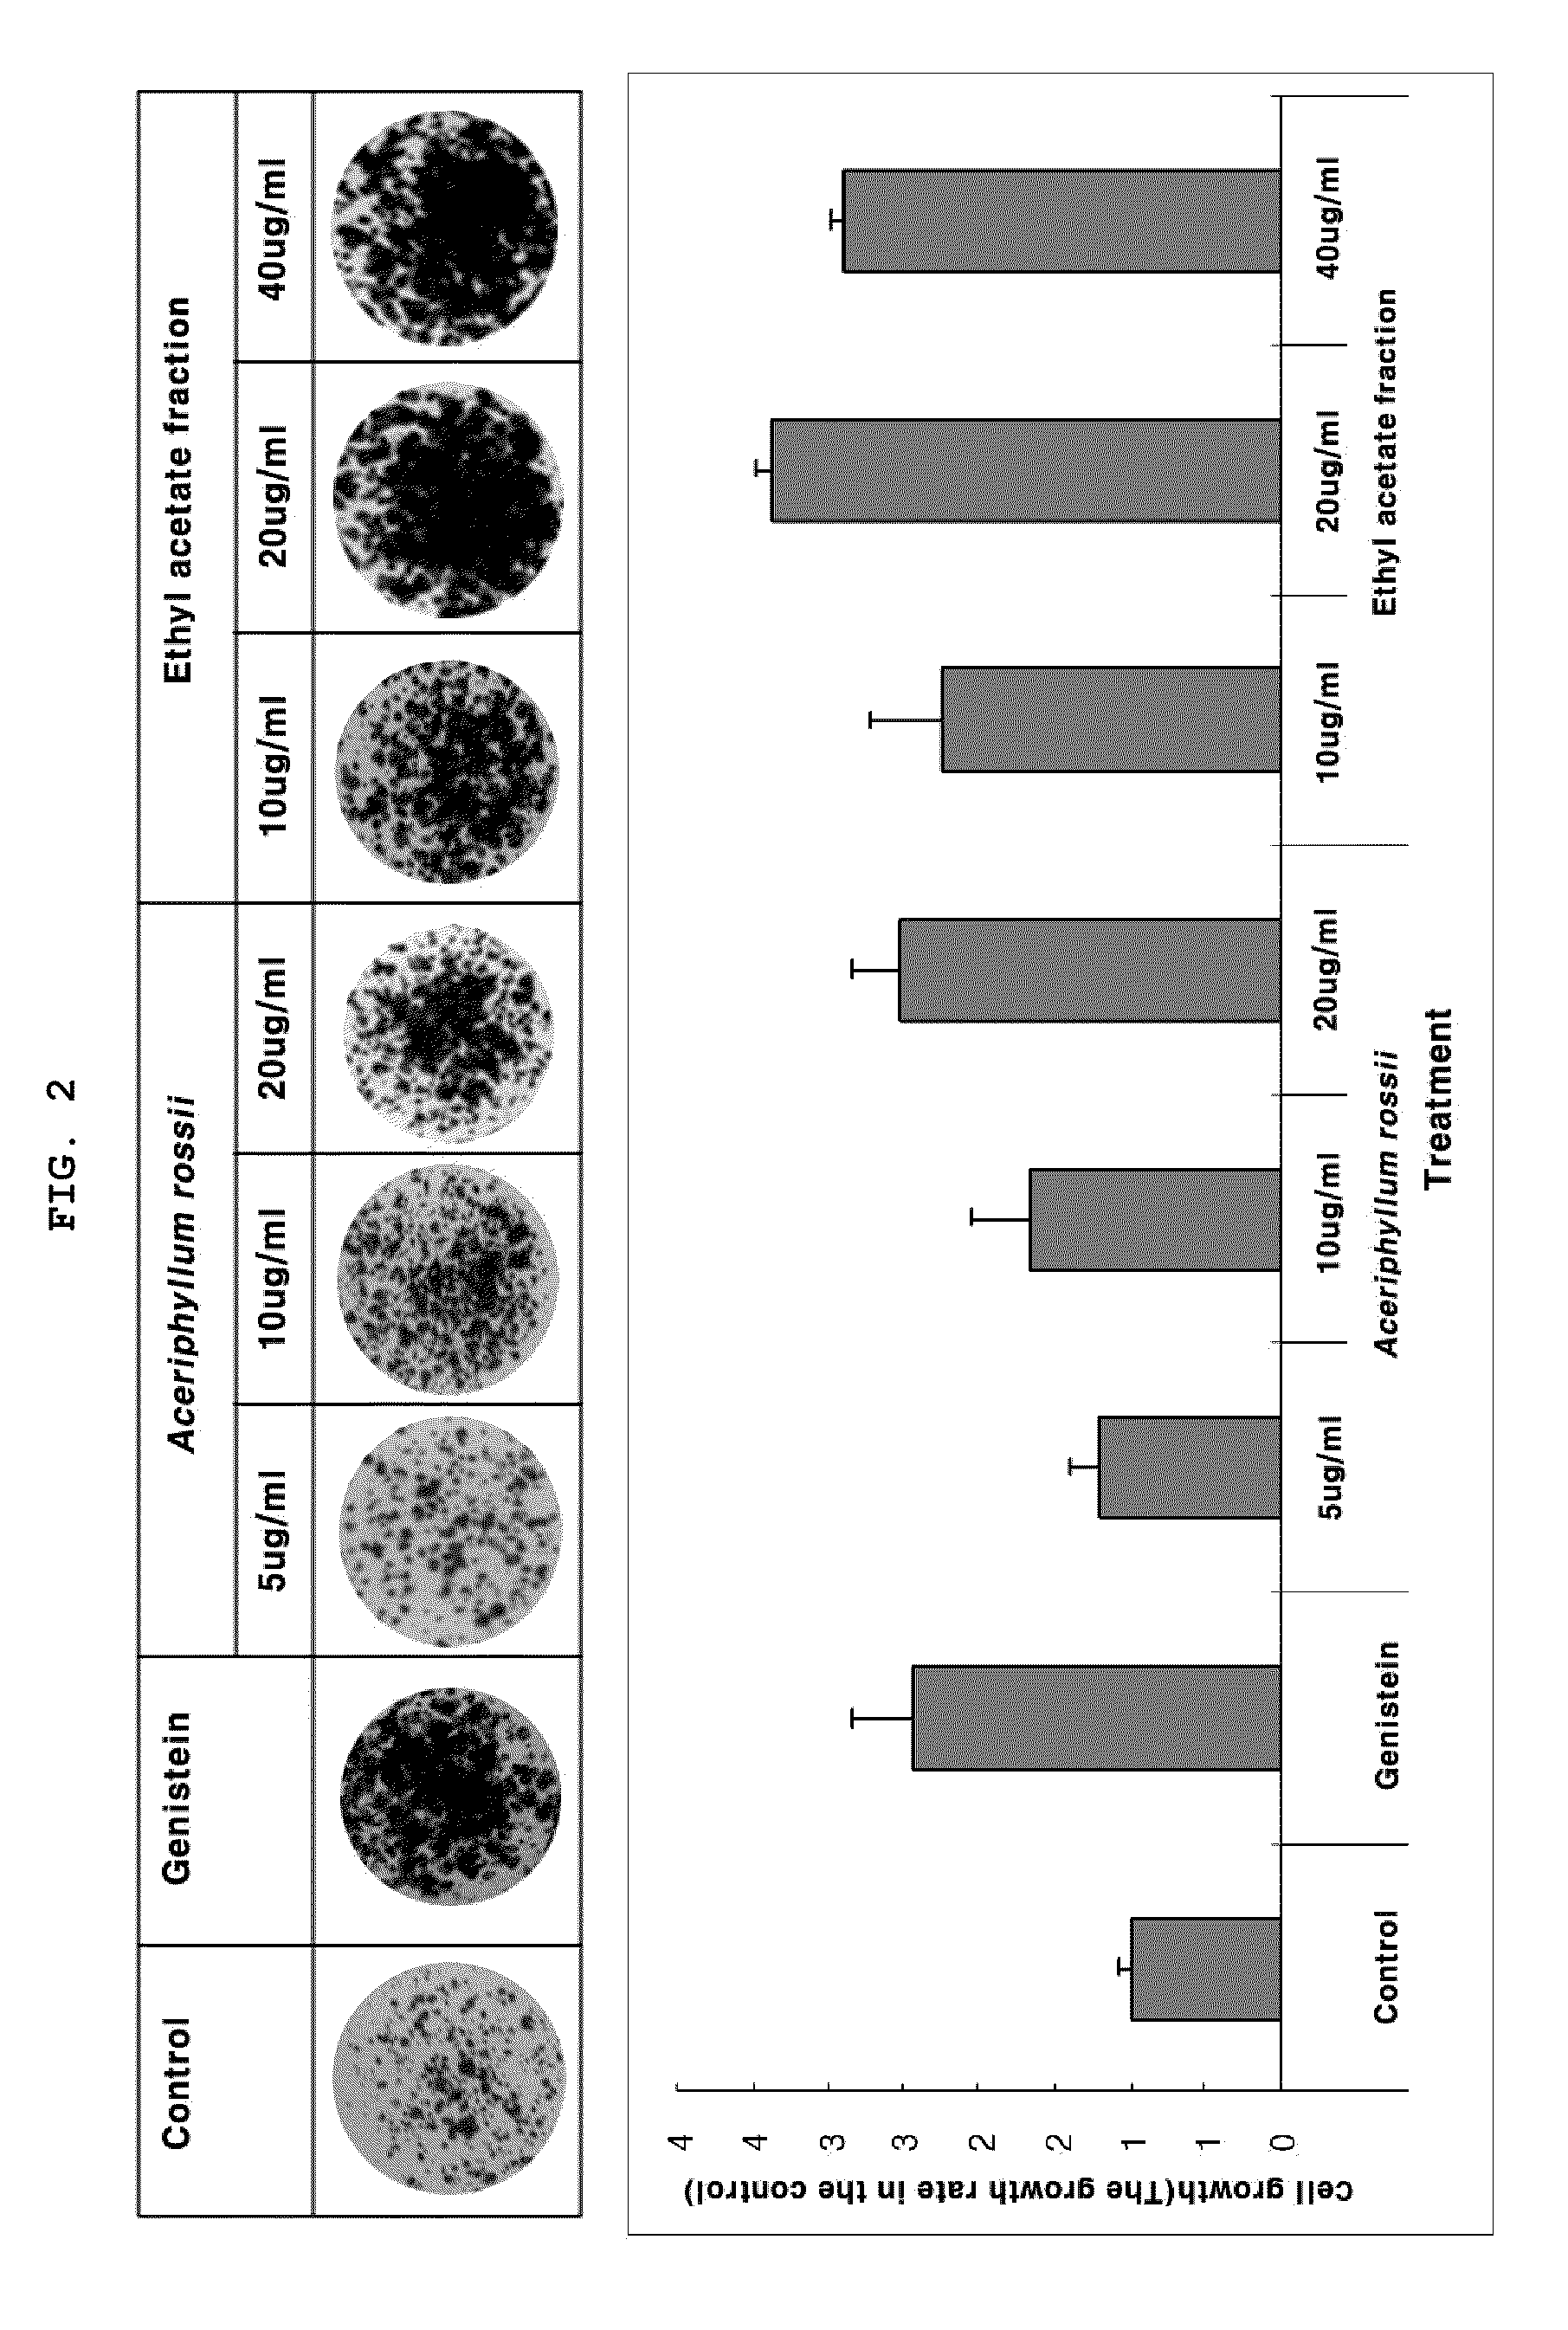 Composition for the prevention and treatment of postmenopausal syndrome containing extracts or fractions of Aceriphyllum rossii as an effective ingredient